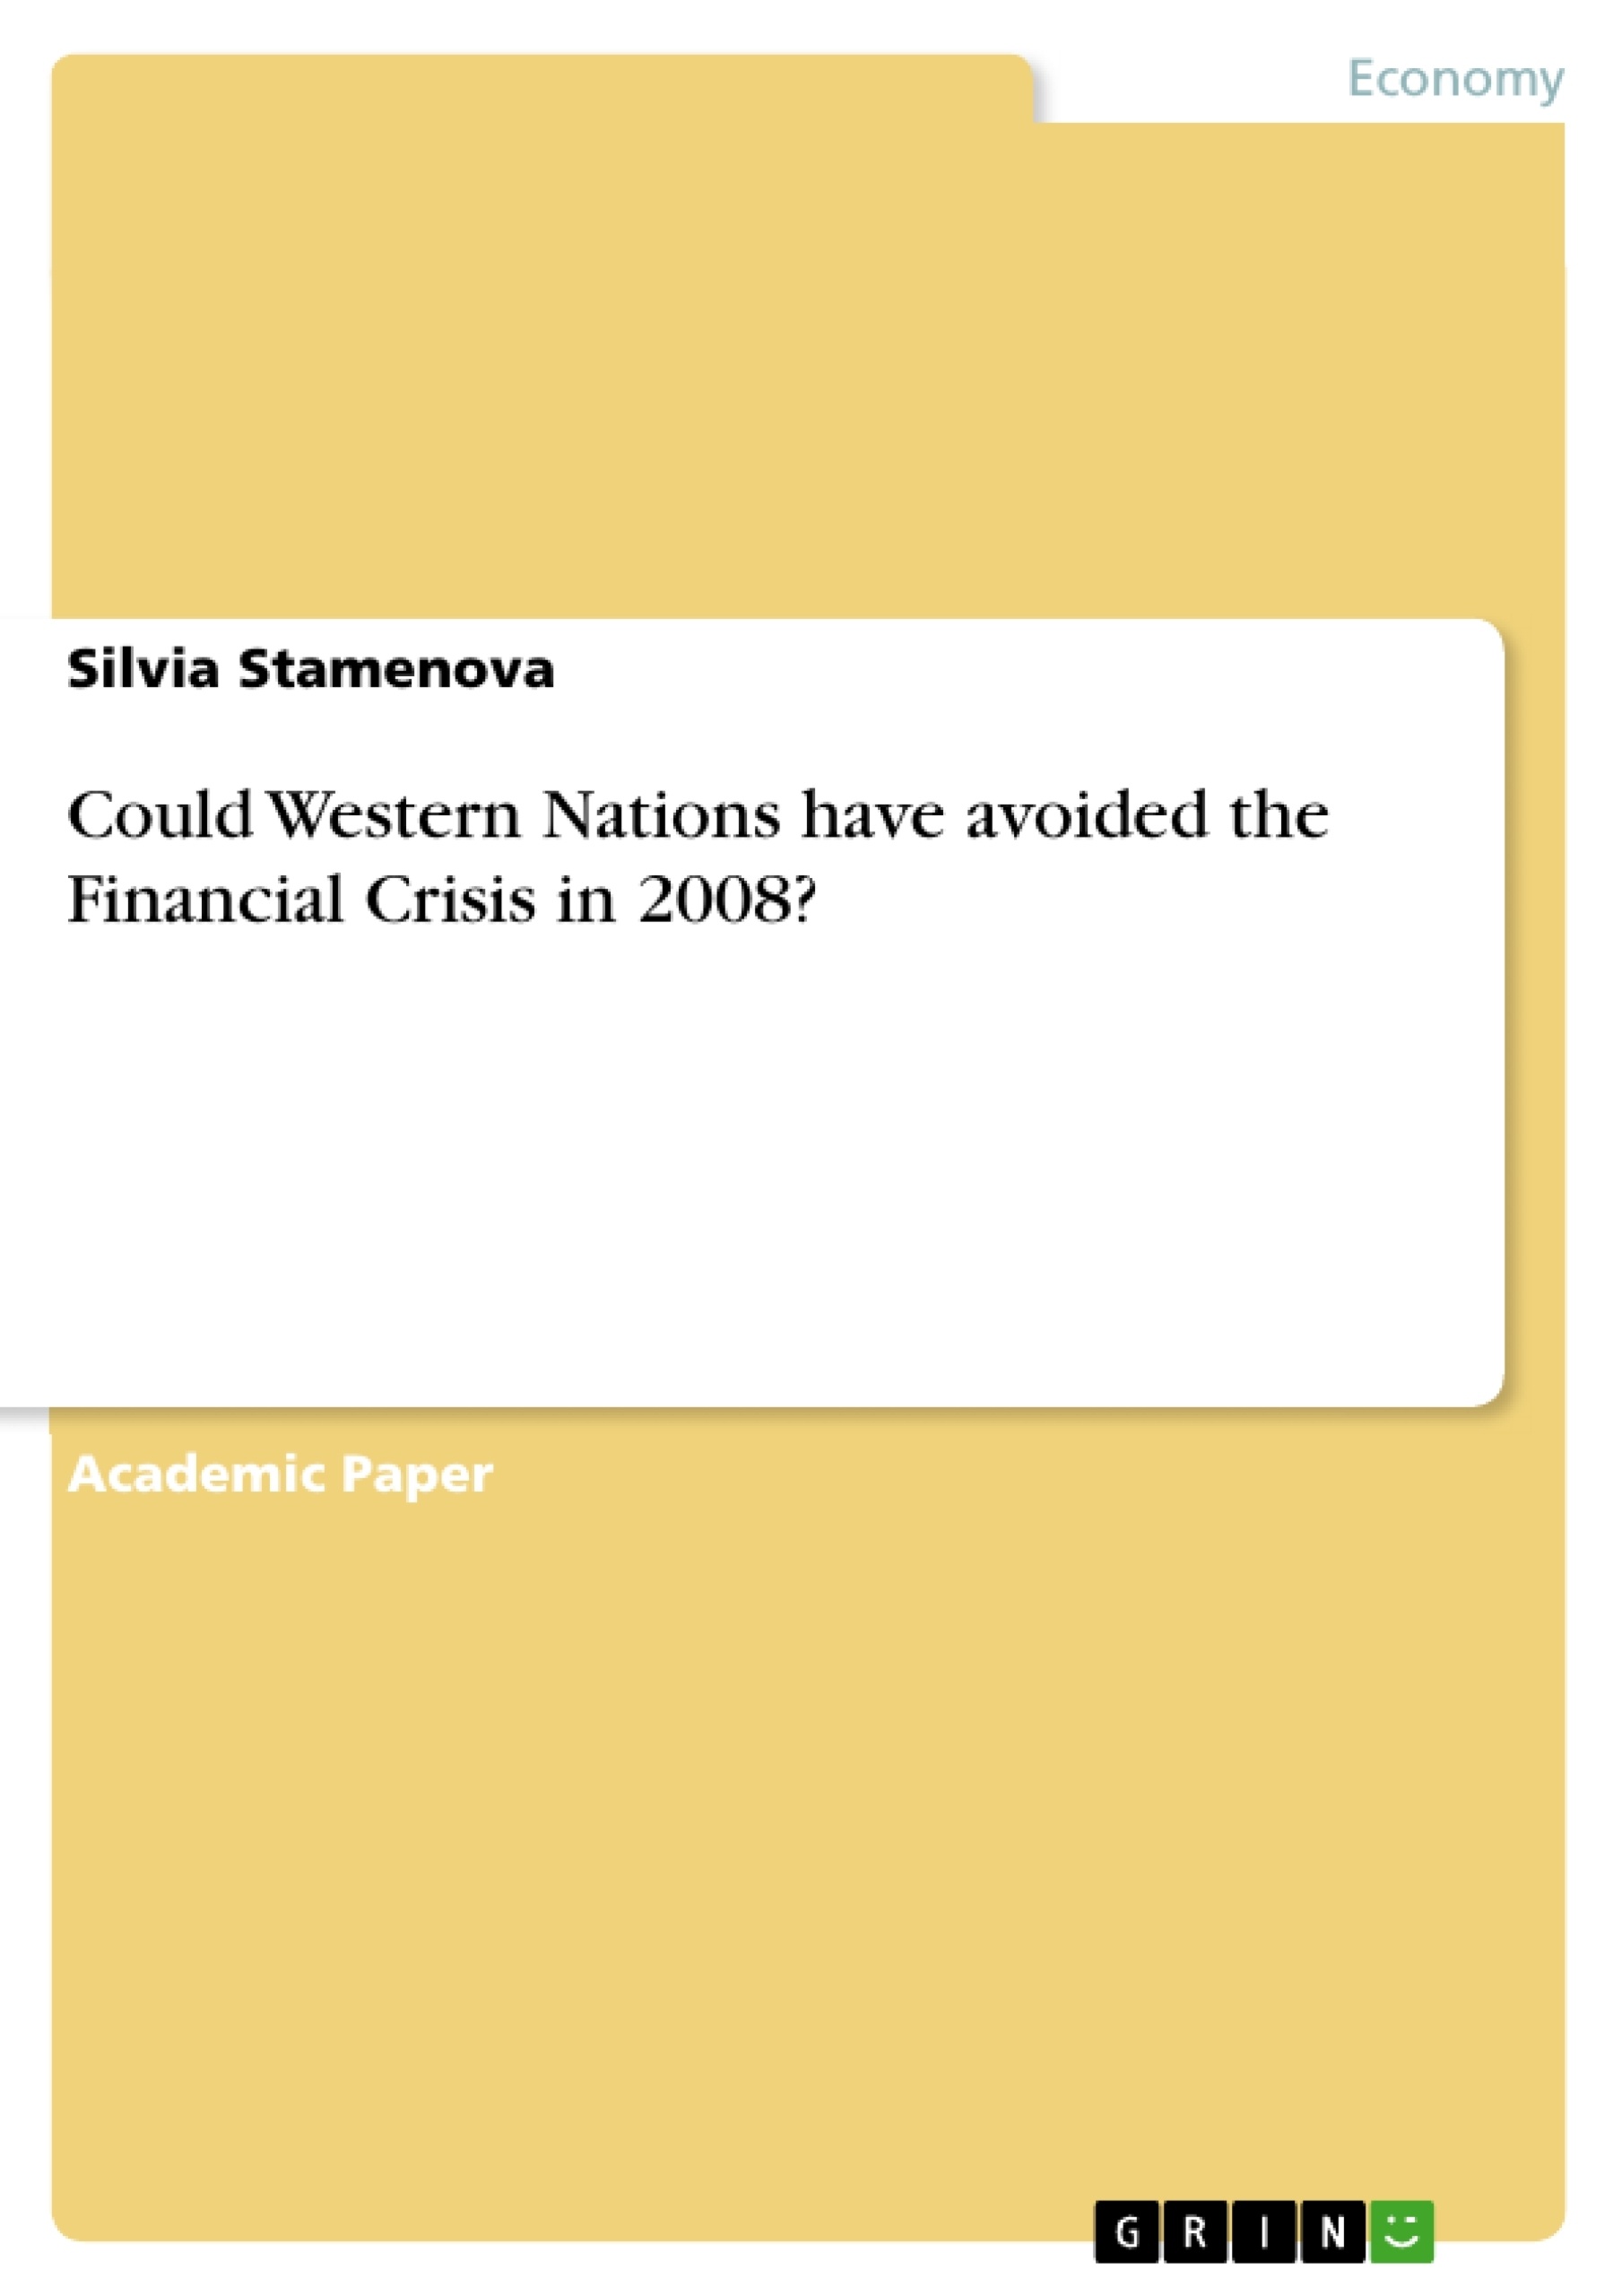 Titre: Could Western Nations have avoided the Financial Crisis in 2008?